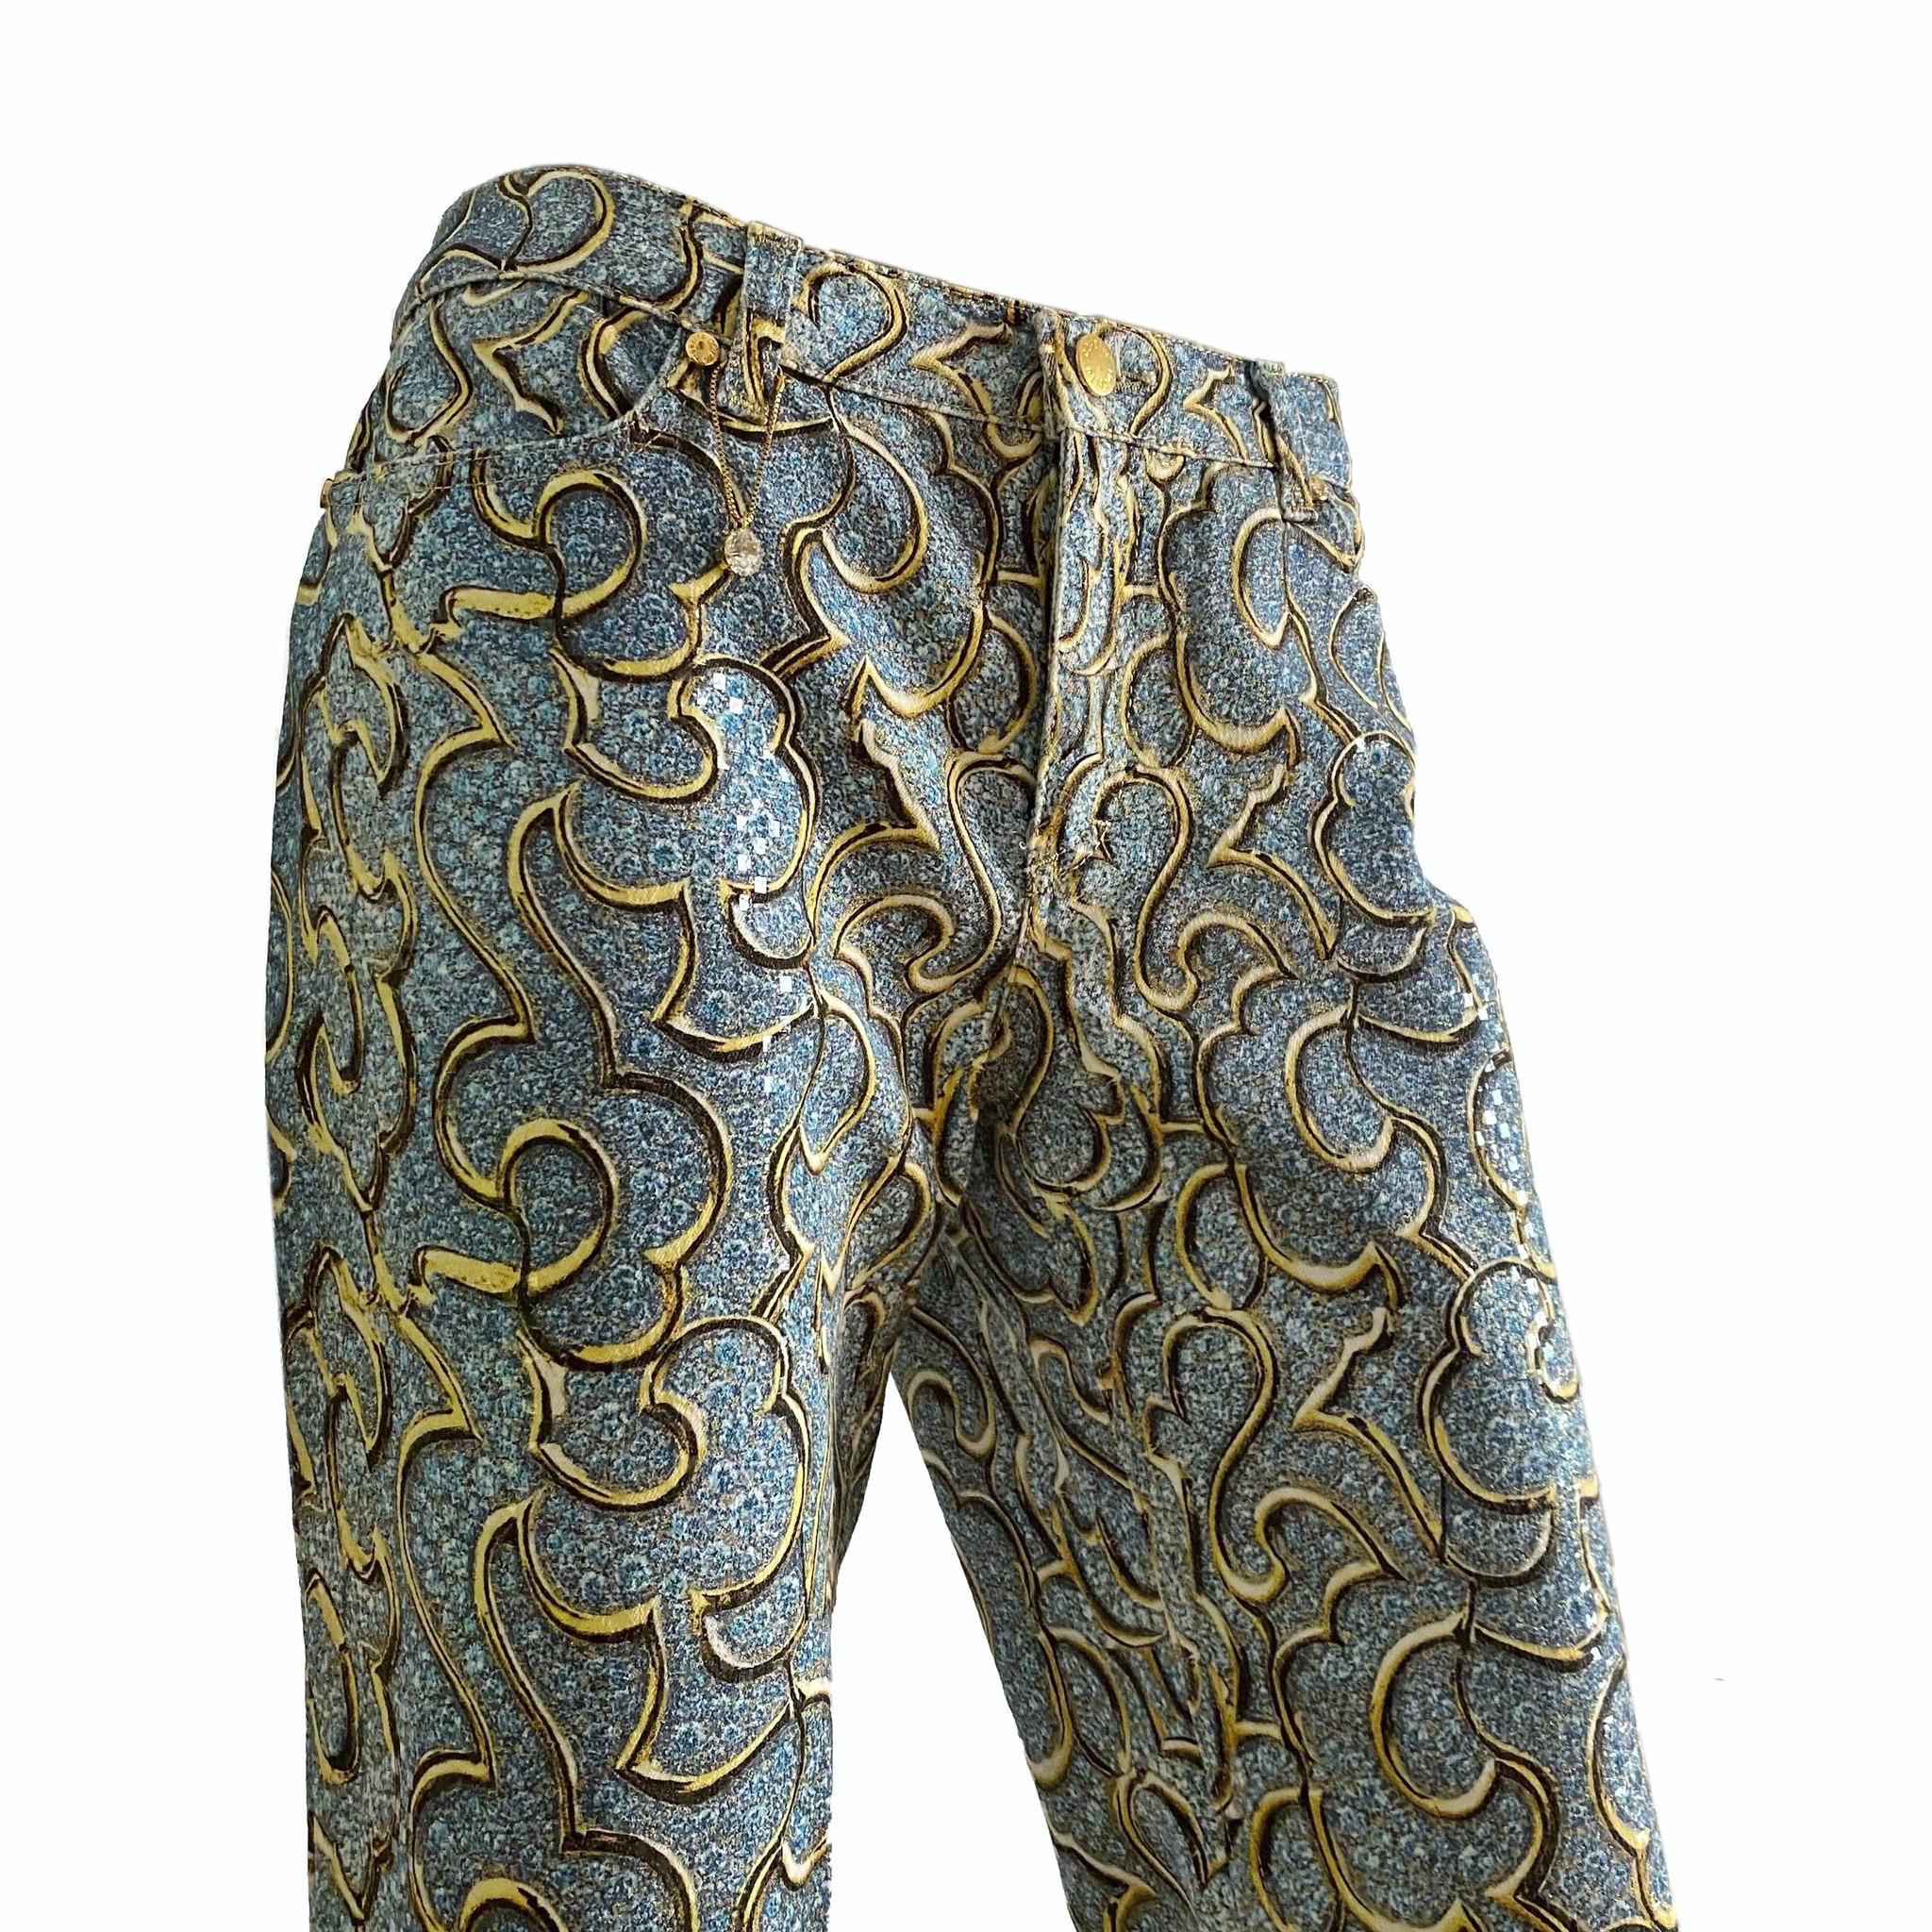 Roberto Cavalli blue Capri pants with clear micro sequins and gold baroque print from Spring/Summer 2000 collection (seen both on runway and campaign). Gold version seen on Aaliyah

Size L

Waistline: 82 cm / 32,2 inch
Front rise: 23 cm / 9